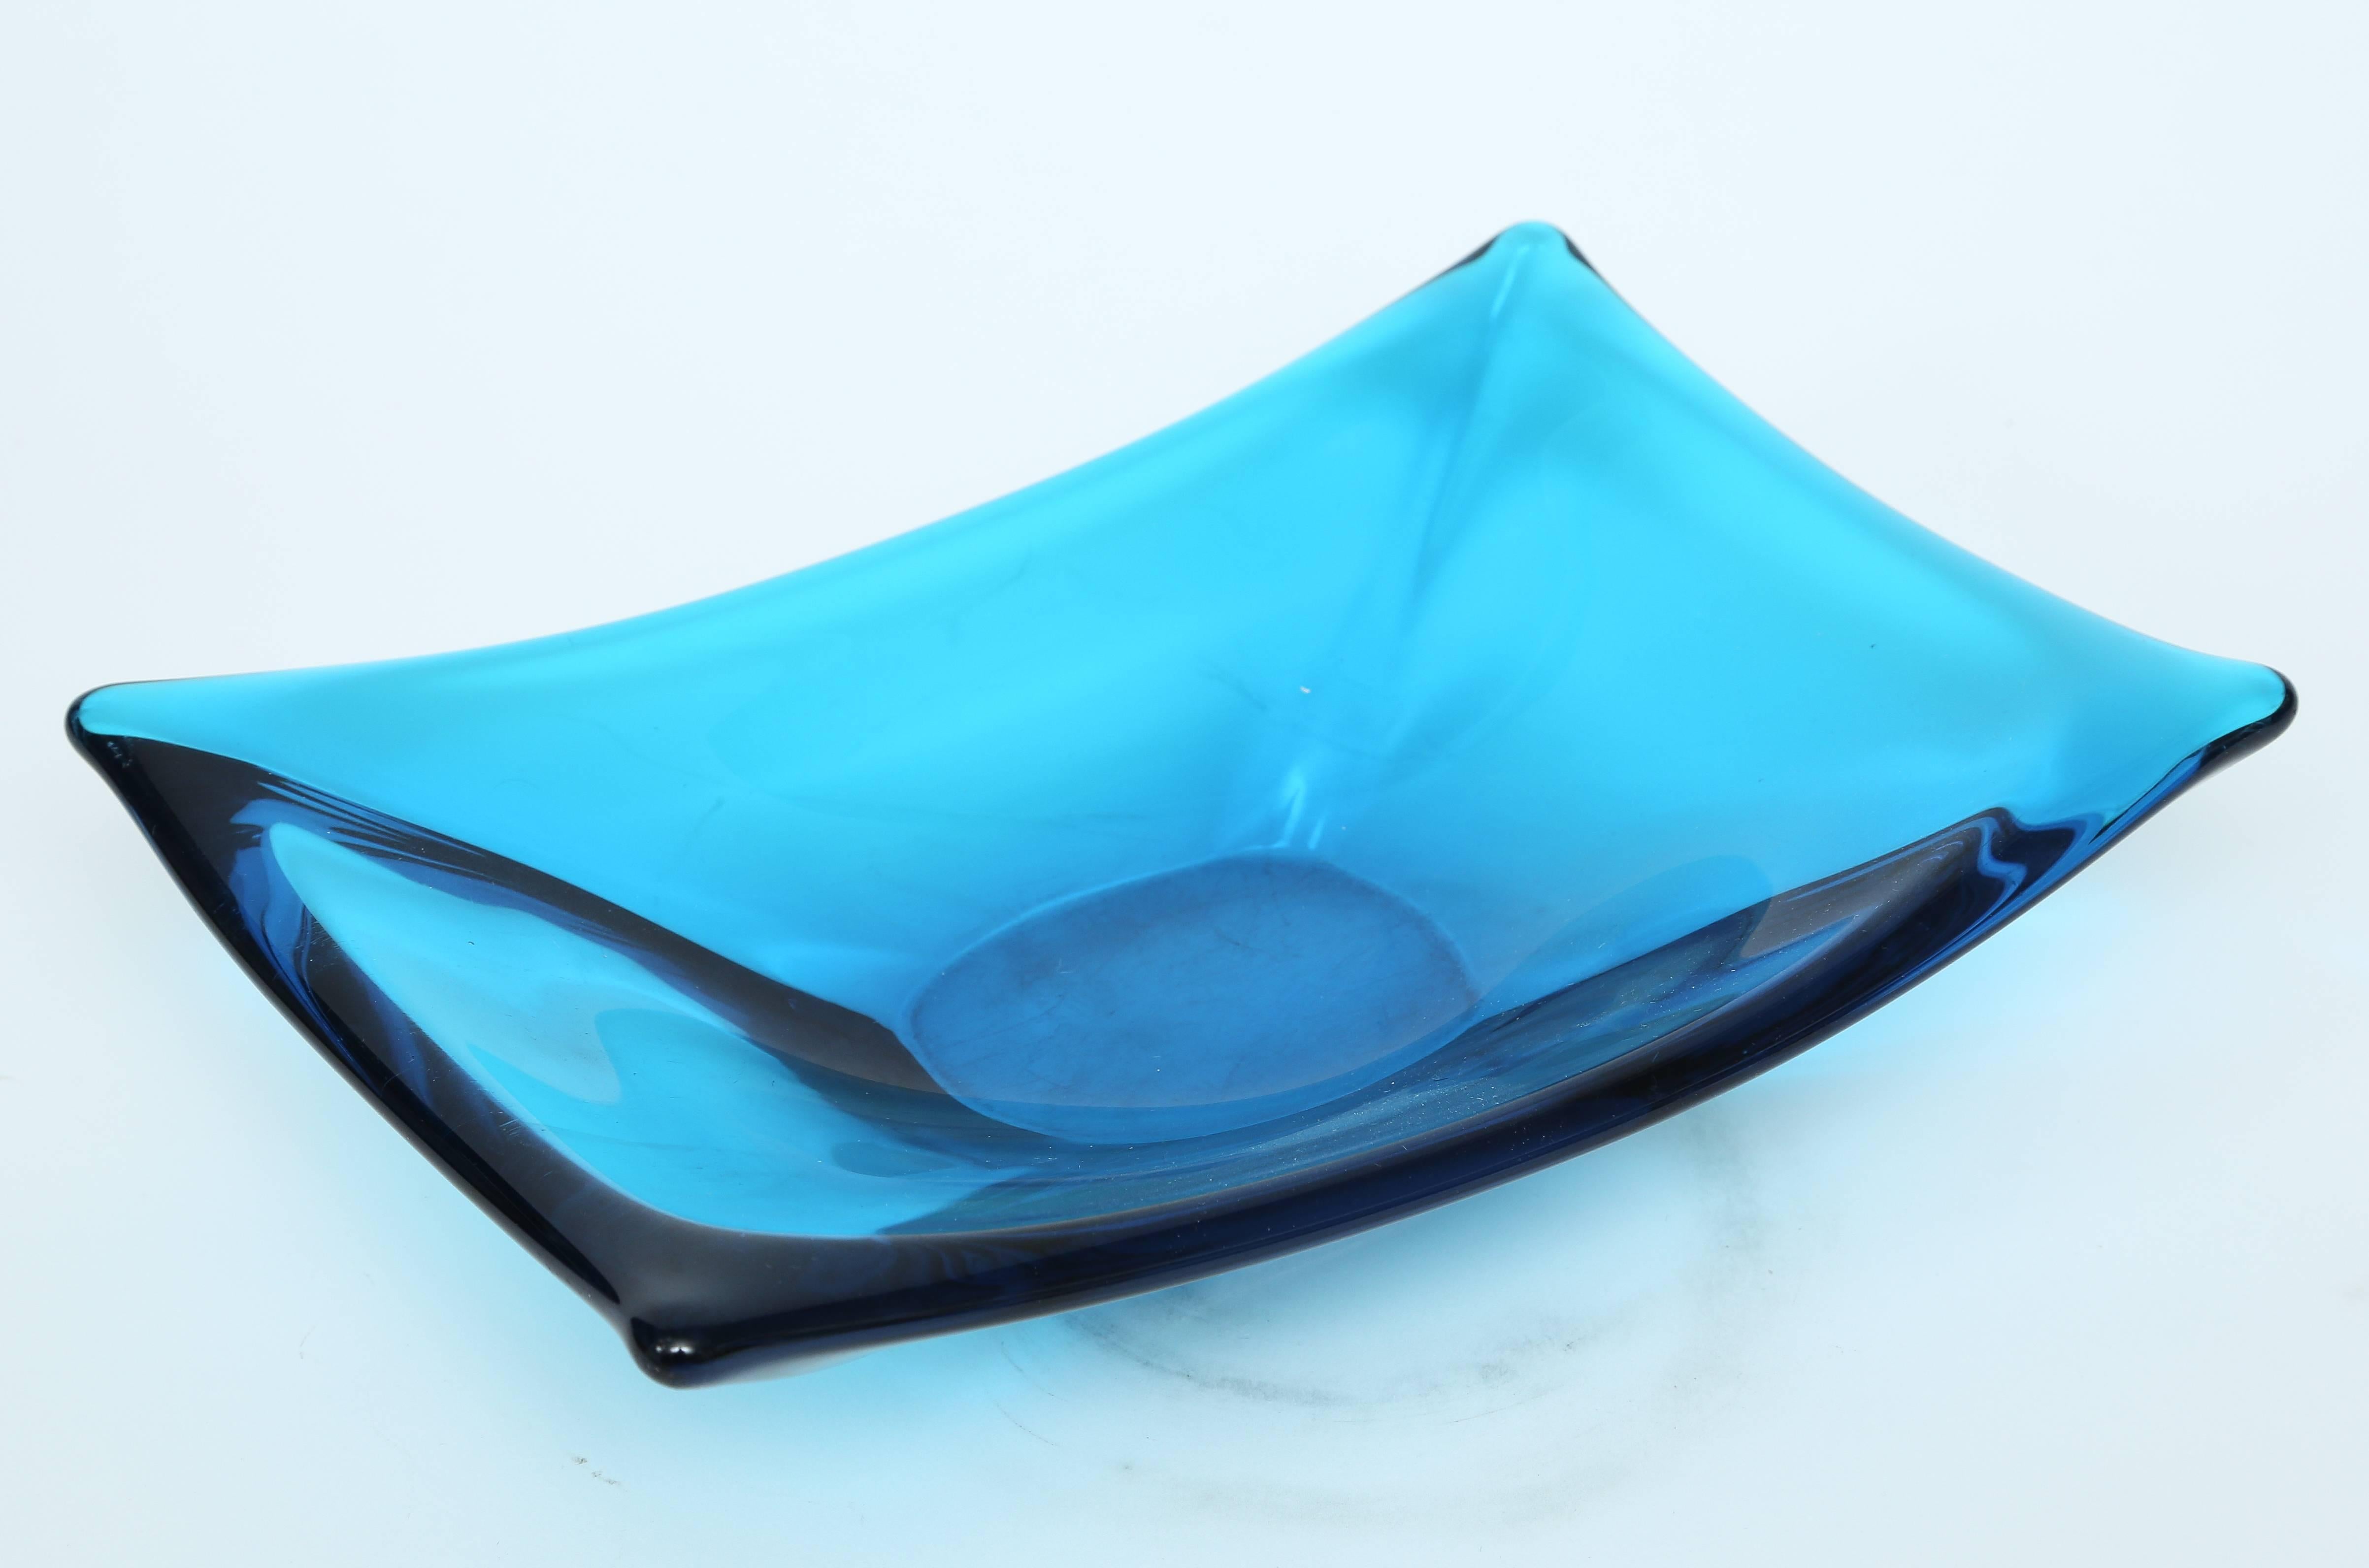 Handblown thick blue glass table accessories. All pieces sgnd. and in perfect vintage condition. This is sold as a set of three.

Center table / bowl: 12